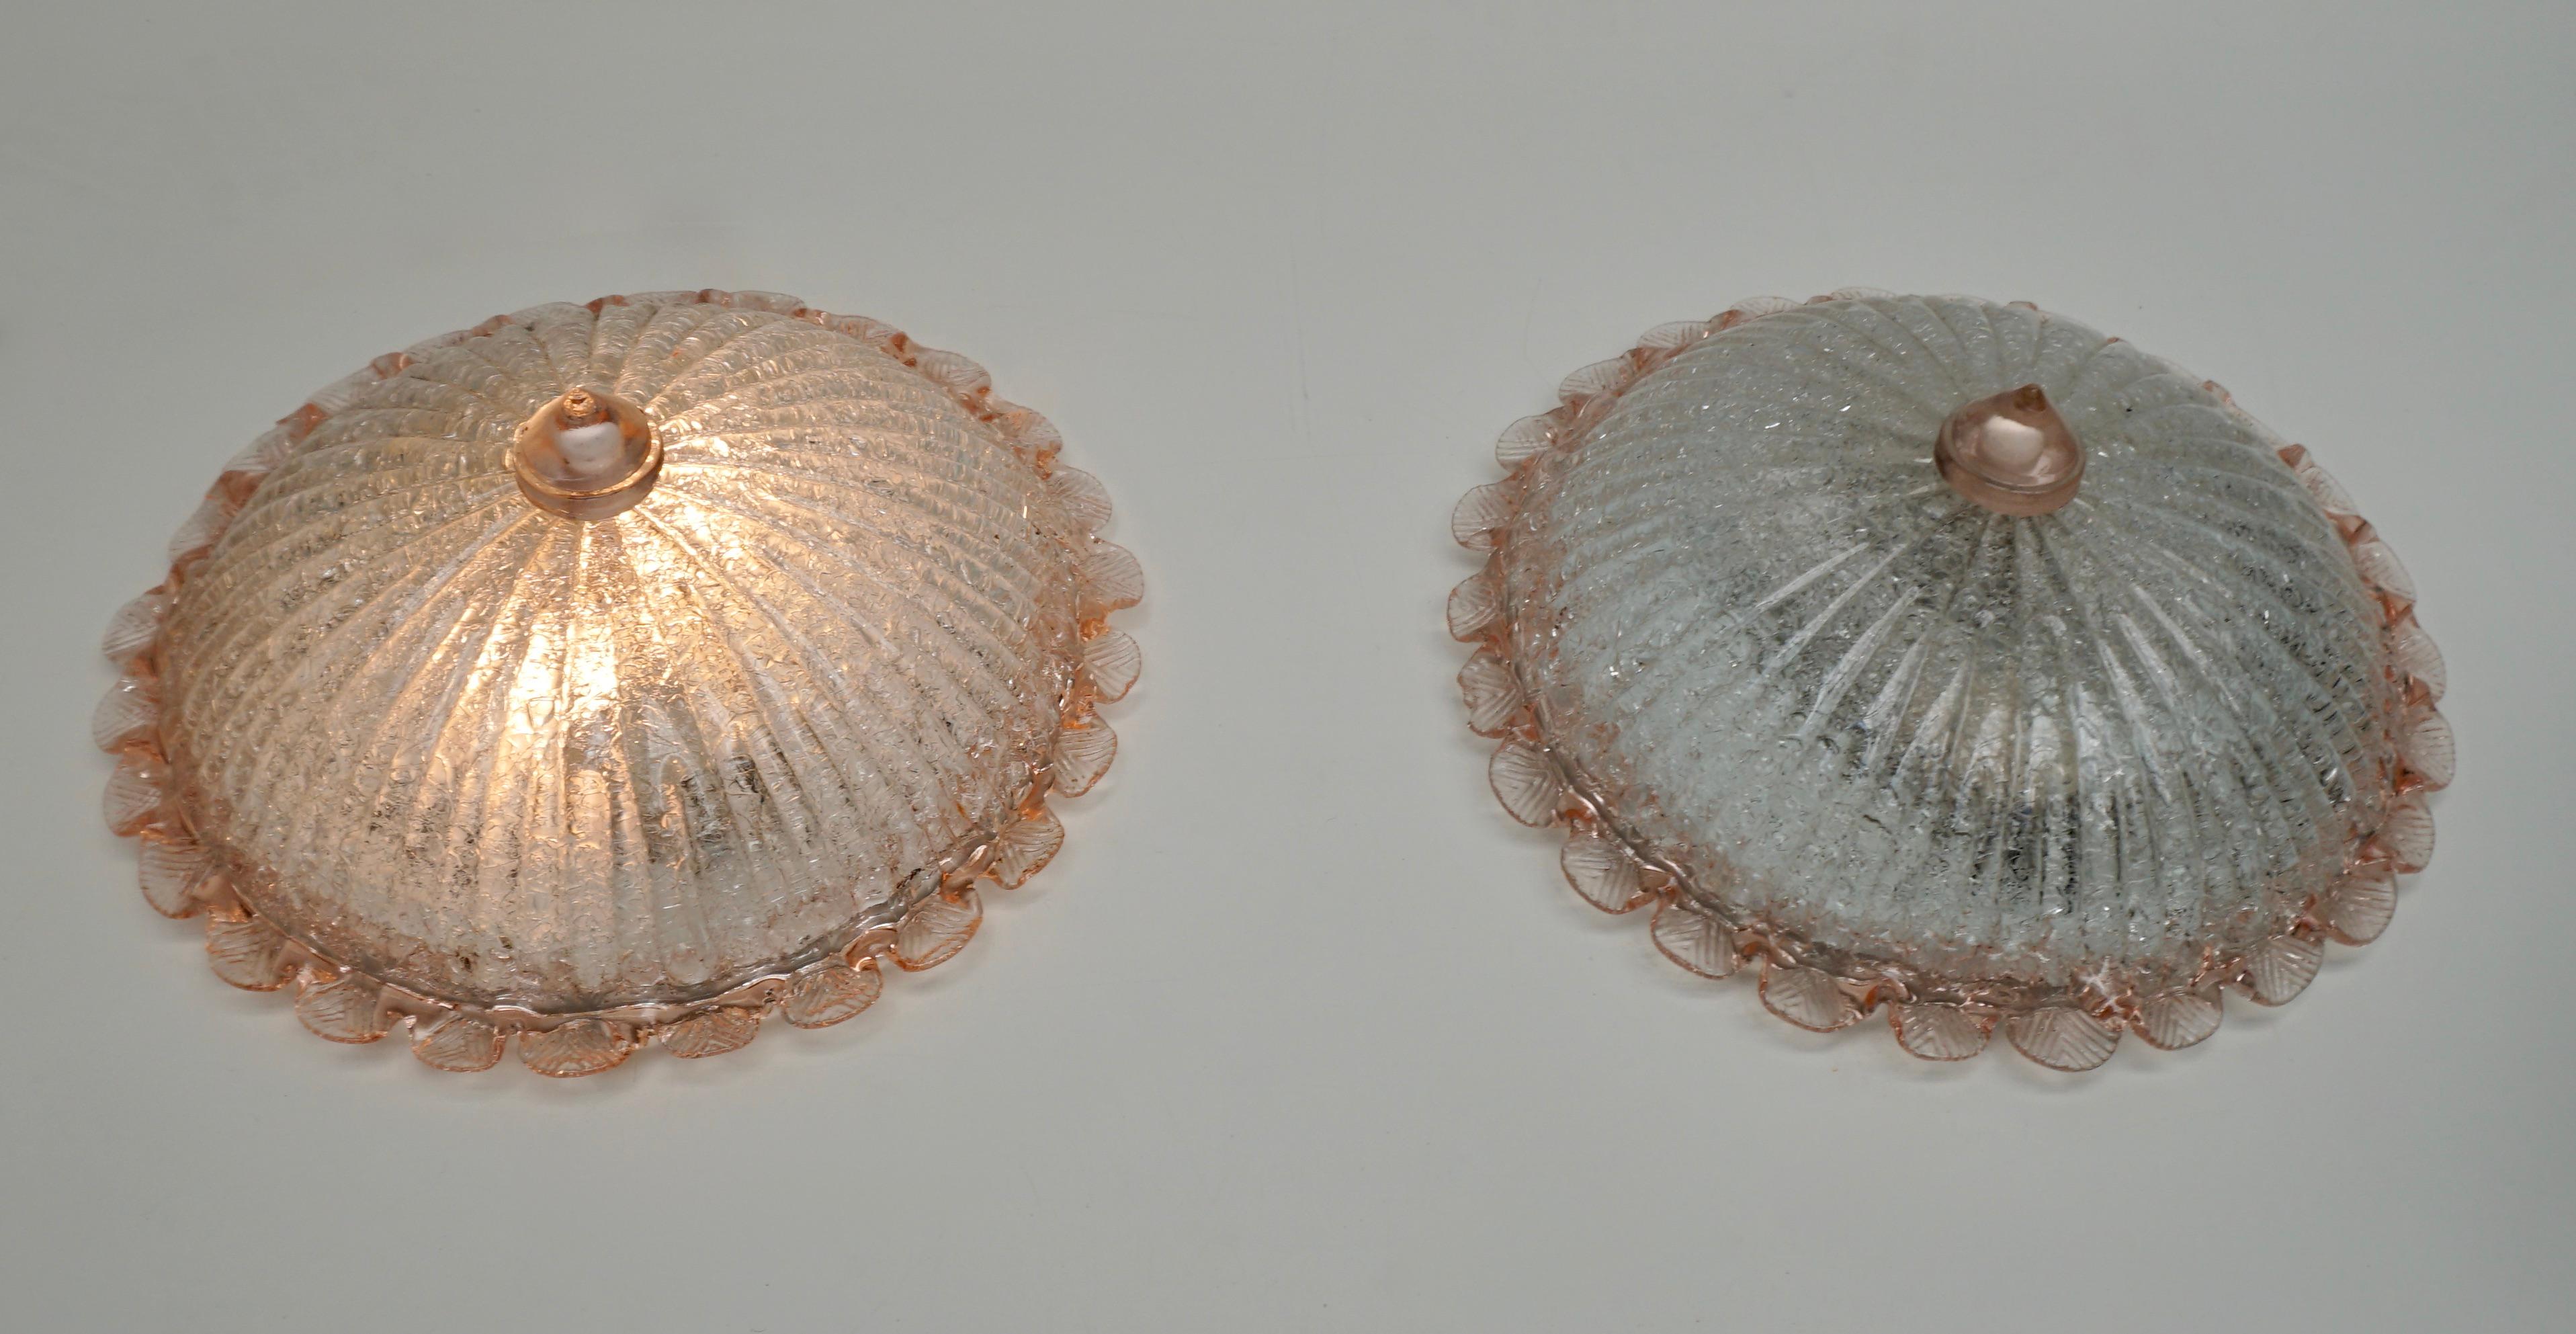 Two elegant hand blown Murano glass flushmount by Barovier & Toso. Mounted on a white frame. With pink, salmon and clear colored glass. The textured glass refract light beautifully. The flush mount fills the room with a soft, warm and welcoming